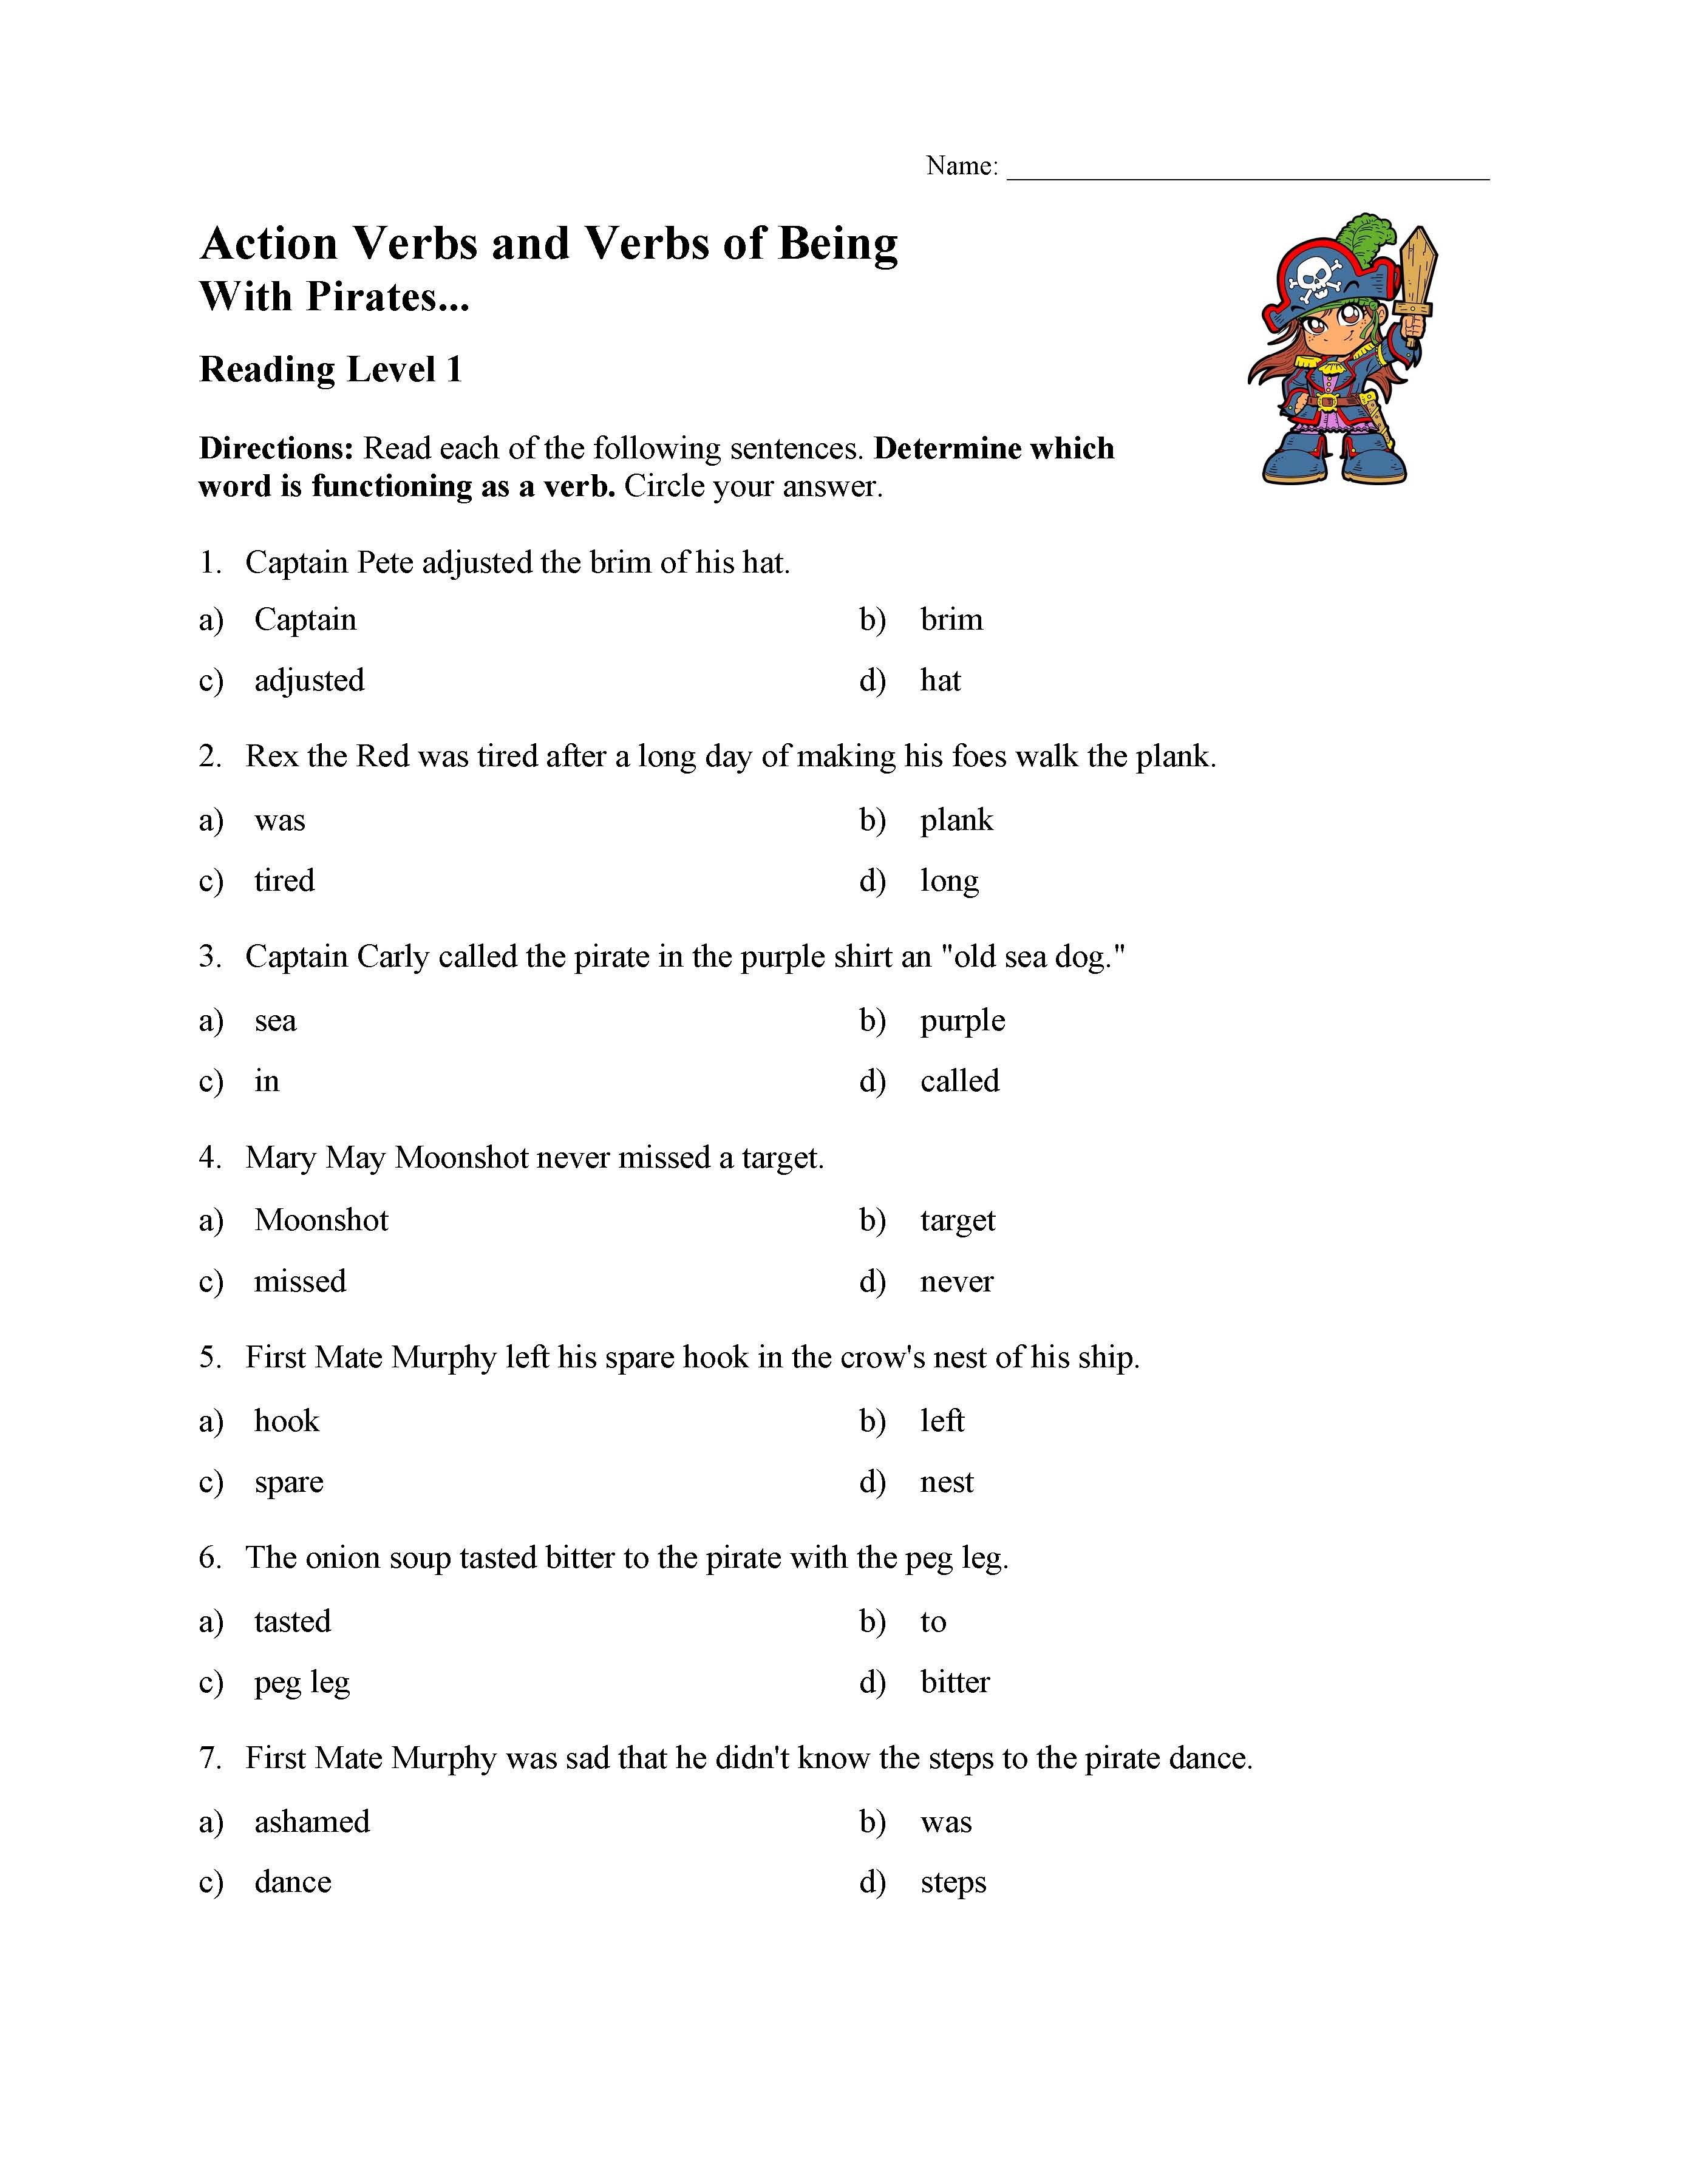 This is a preview image of the Action Verbs and Verbs of Being Test 1 | Reading Level 1.